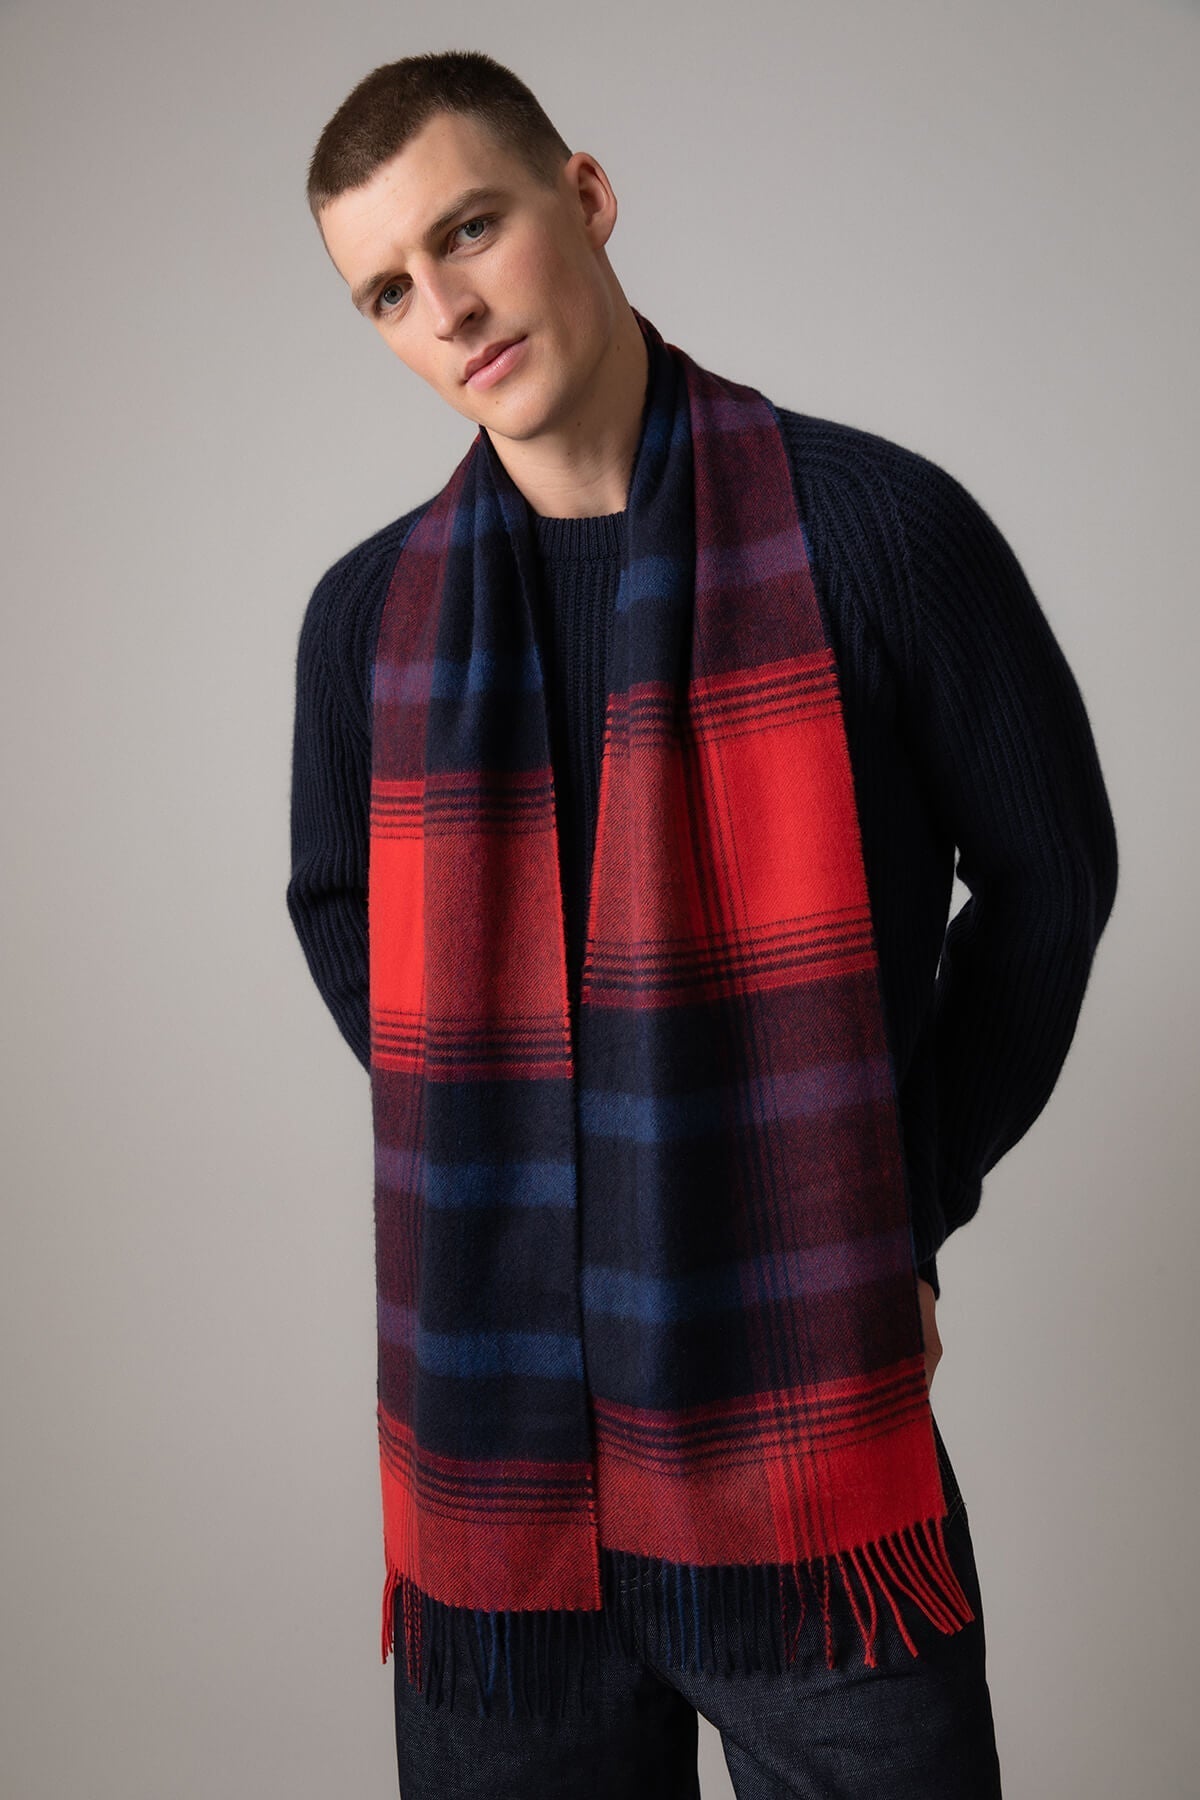 Johnstons of Elgin Asymmetric Check Cashmere Scarf in Red on a grey background WA000016RU7319ONE